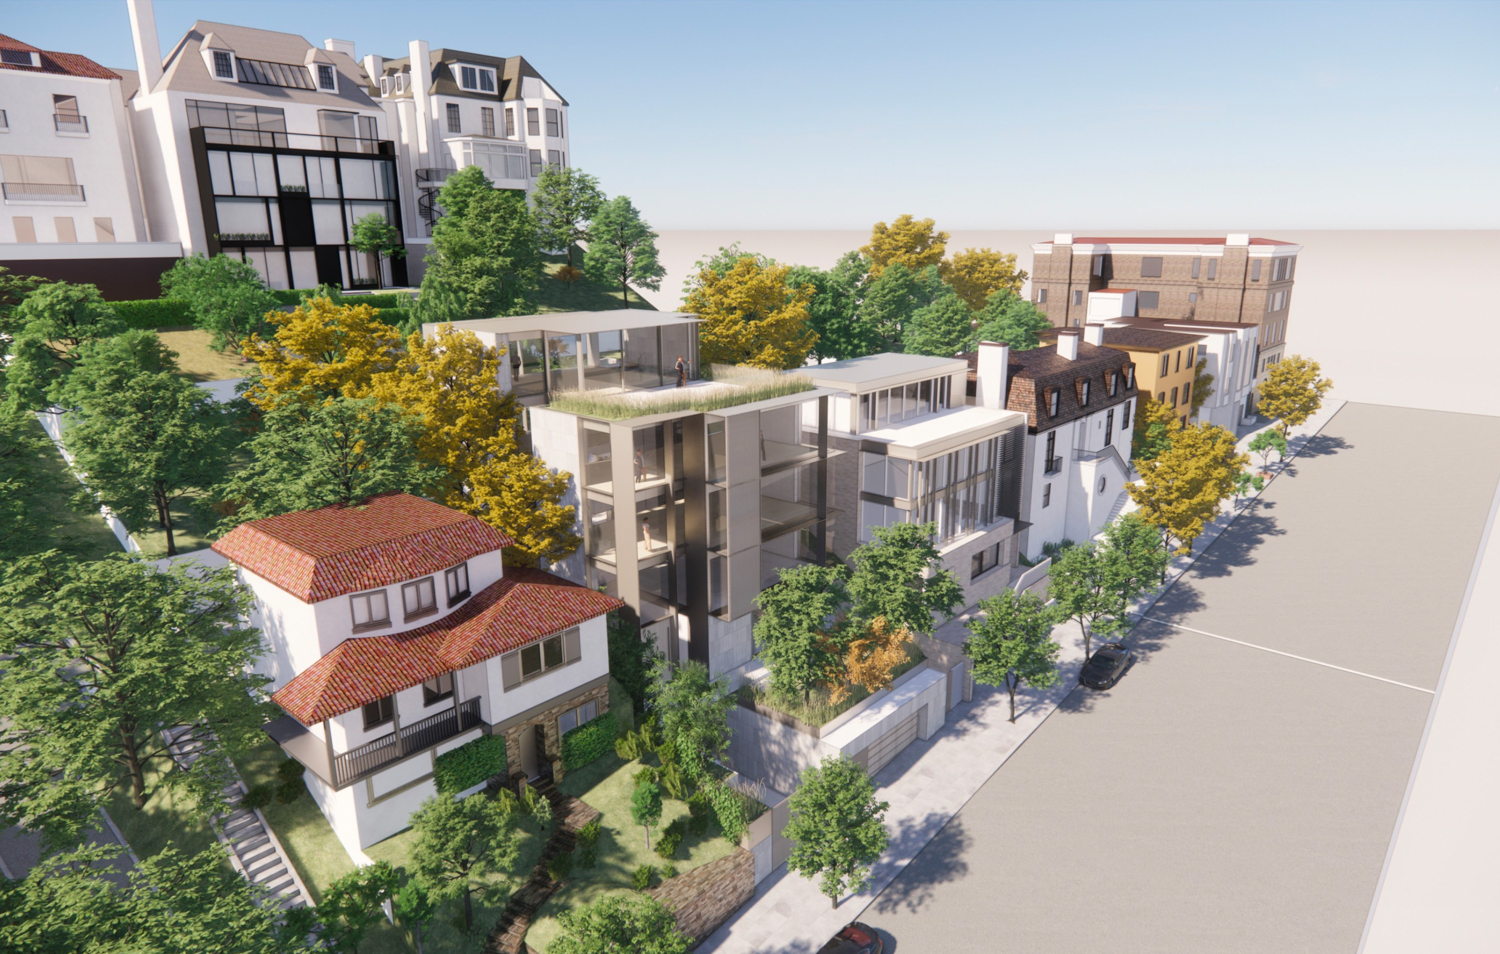 2915 Vallejo Street aerial view, rendering by Dumican Mosey Architects